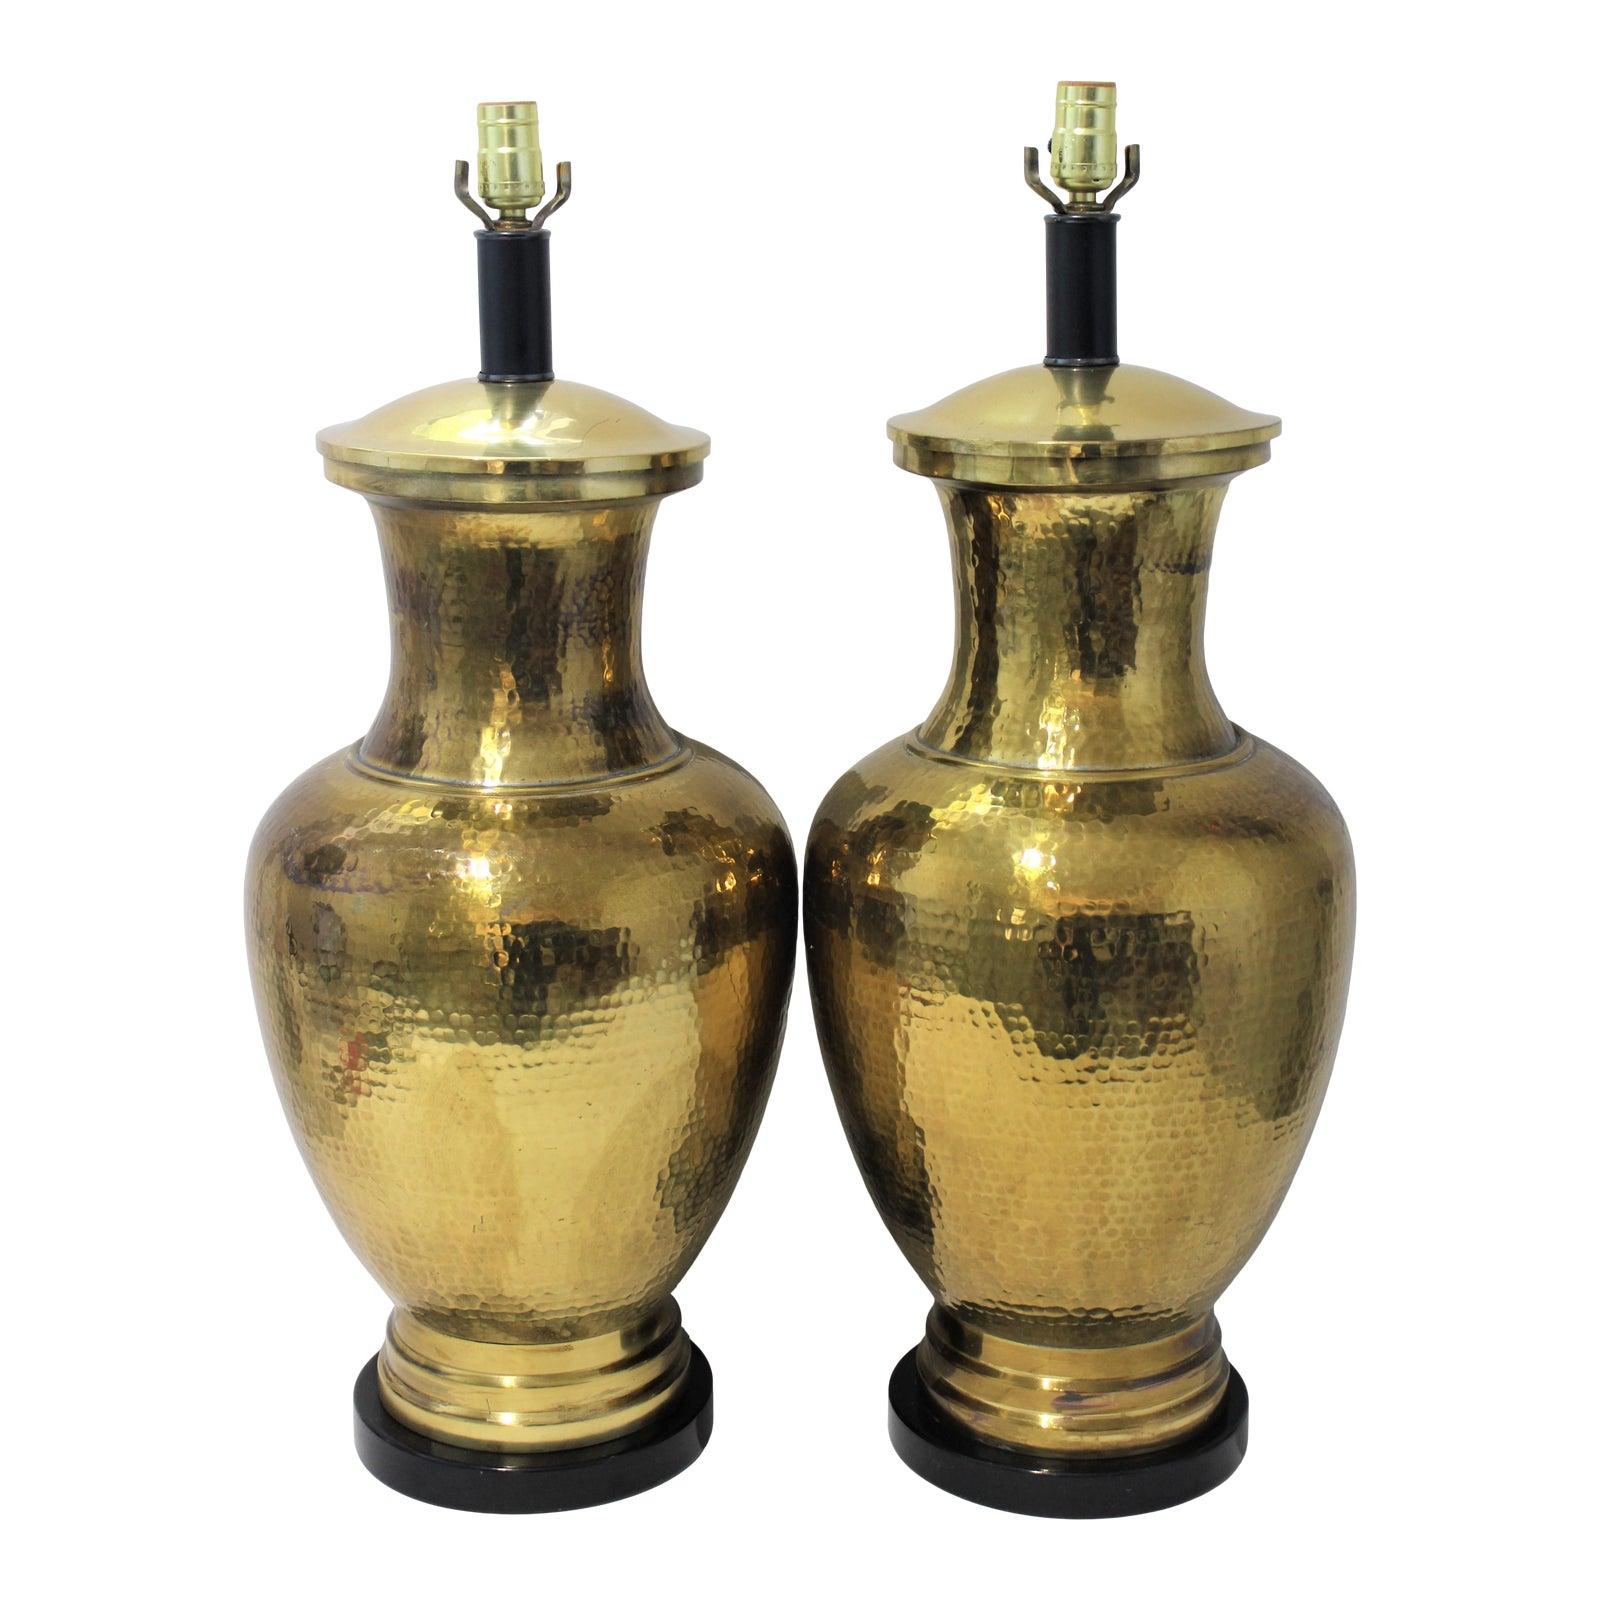 Pair of Table Lamps Made from Artisan Hammered Brass Vases